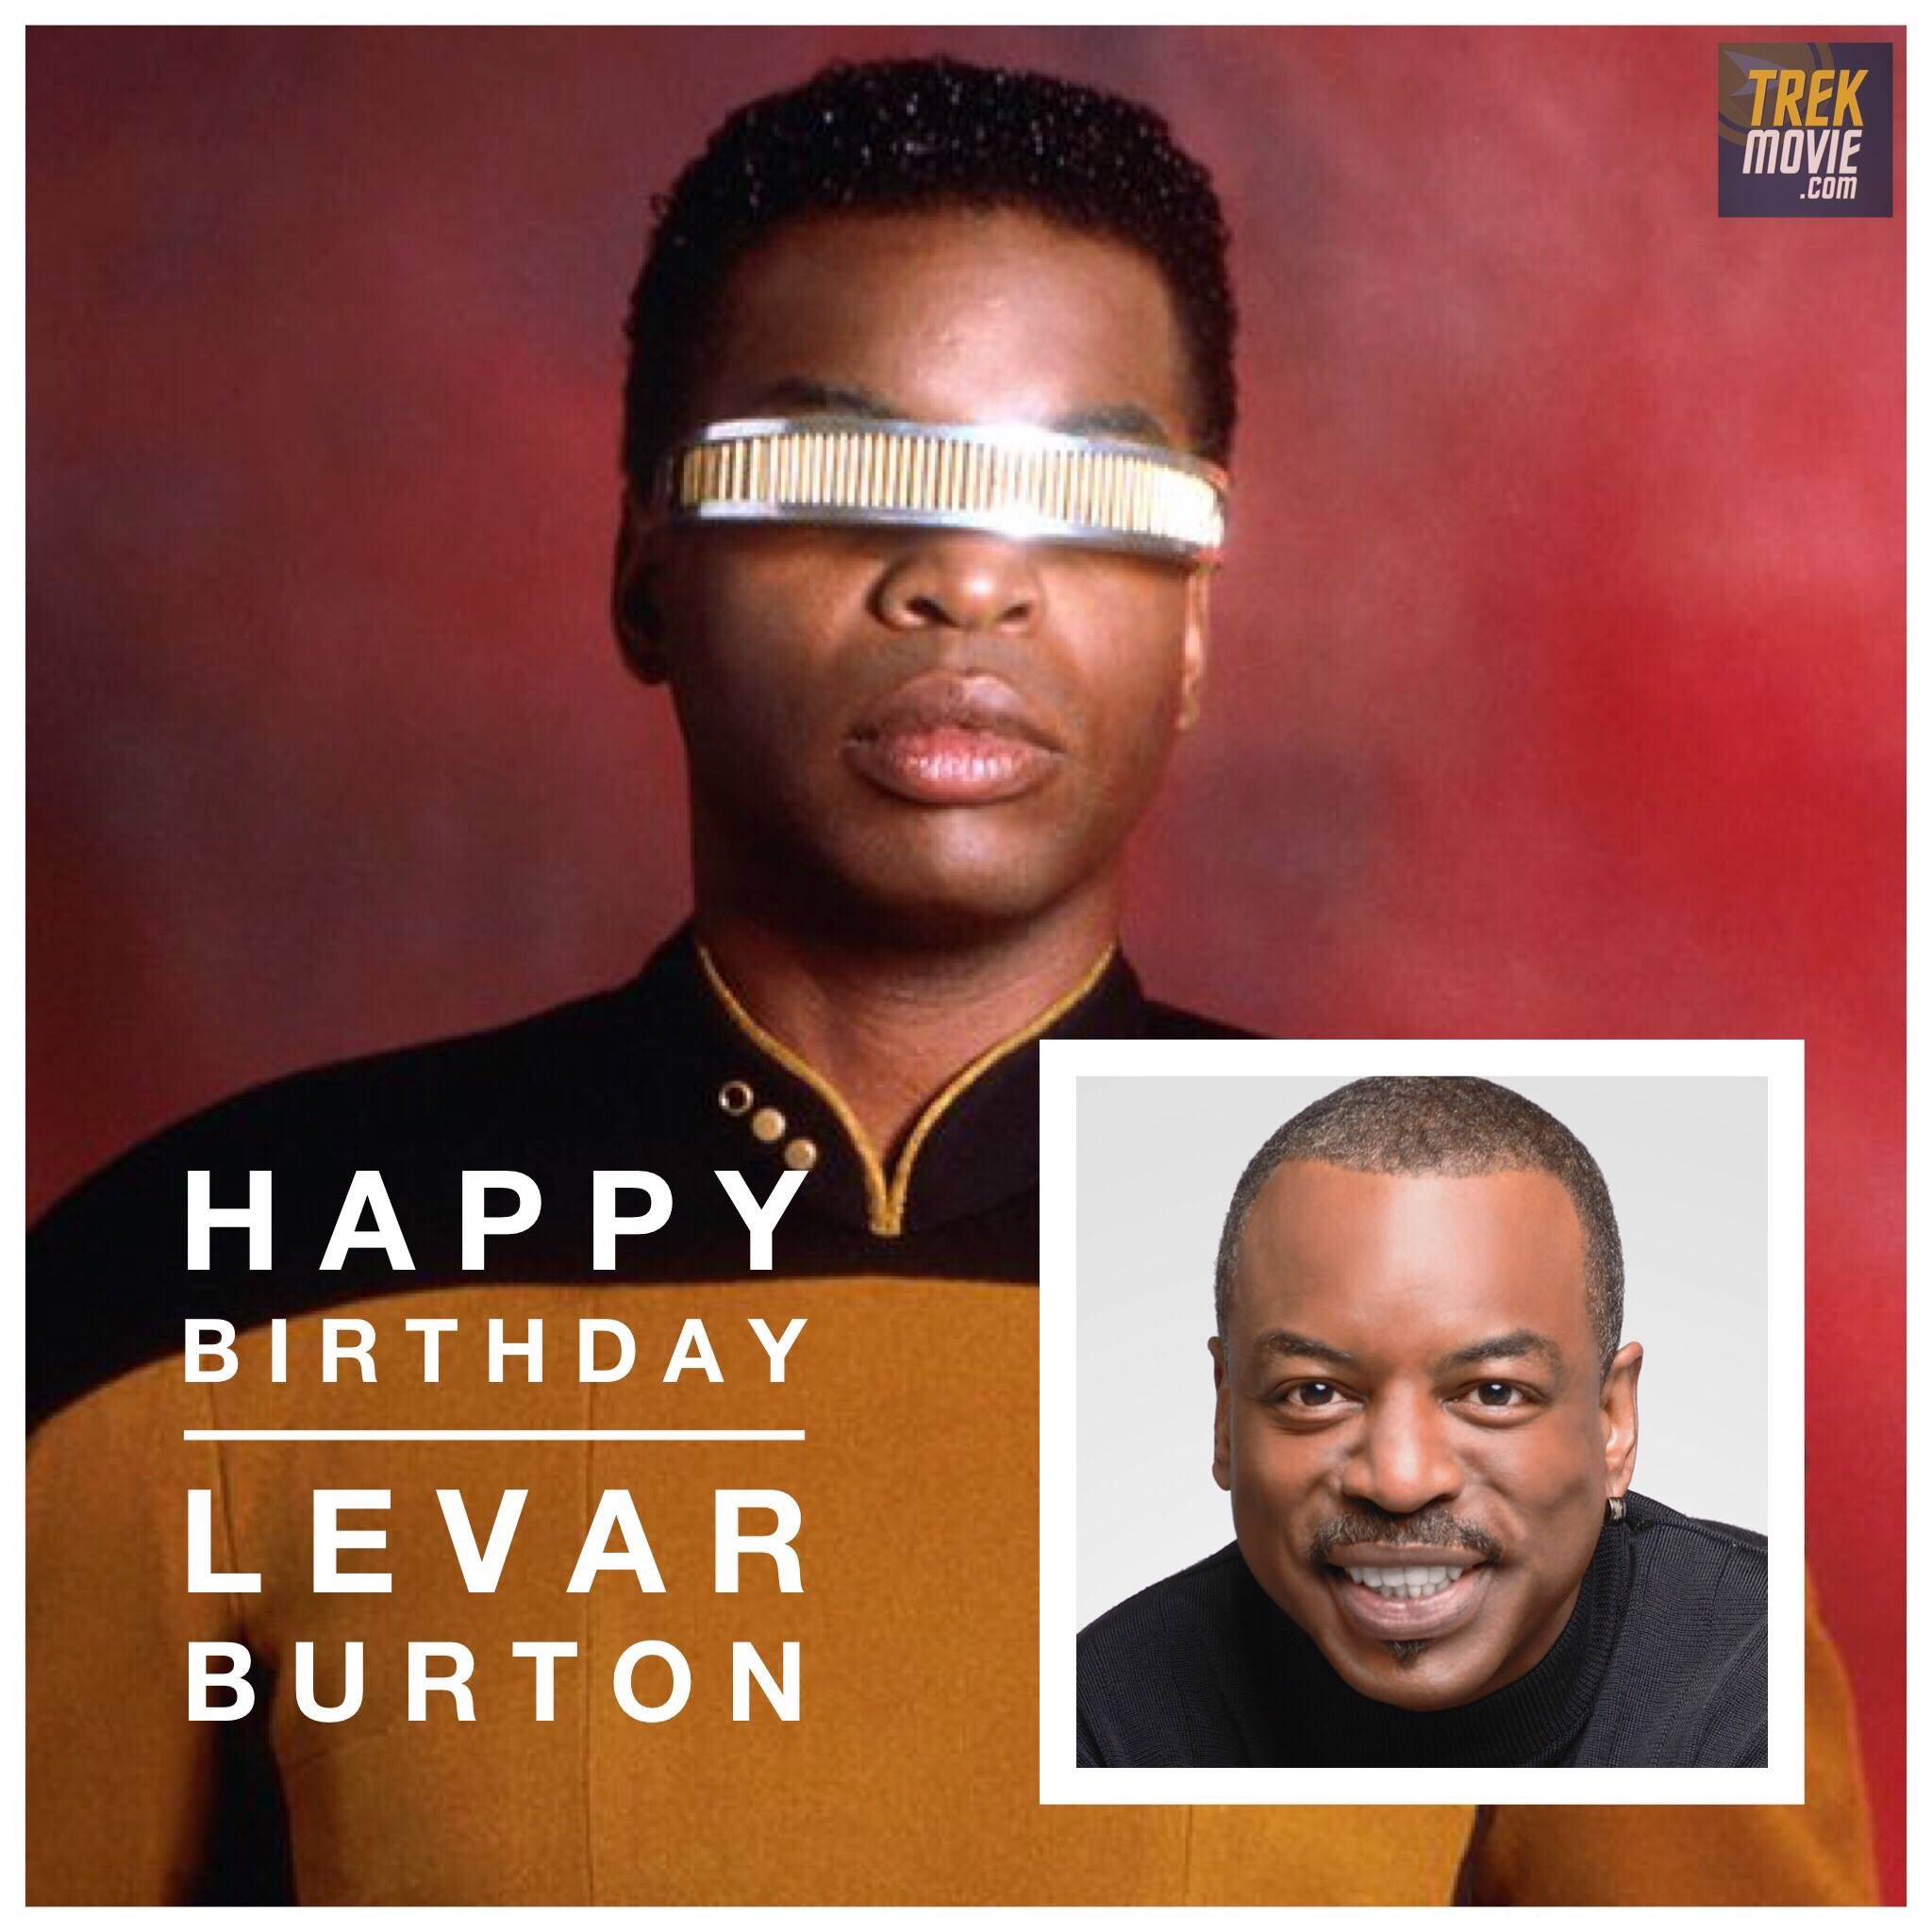  Happy Birthday Levar Burton! May you have the best day ever! 